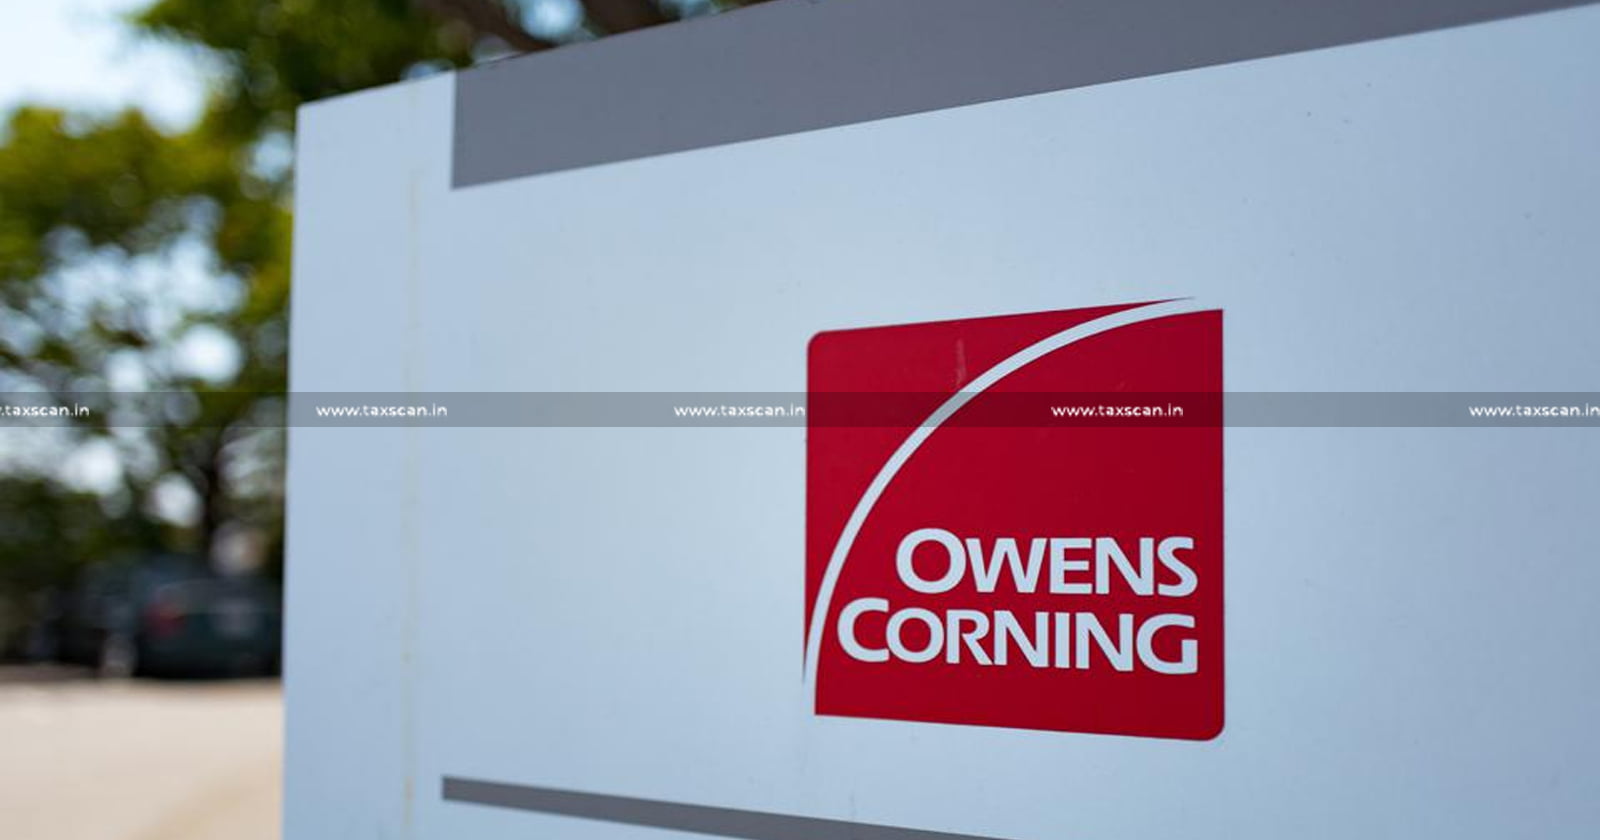 Charges - received - Bushings - Taxable - Indo - Singapore - Treaty - ITAT - TDS - Credit - Owens - Corning - TAXSCAN